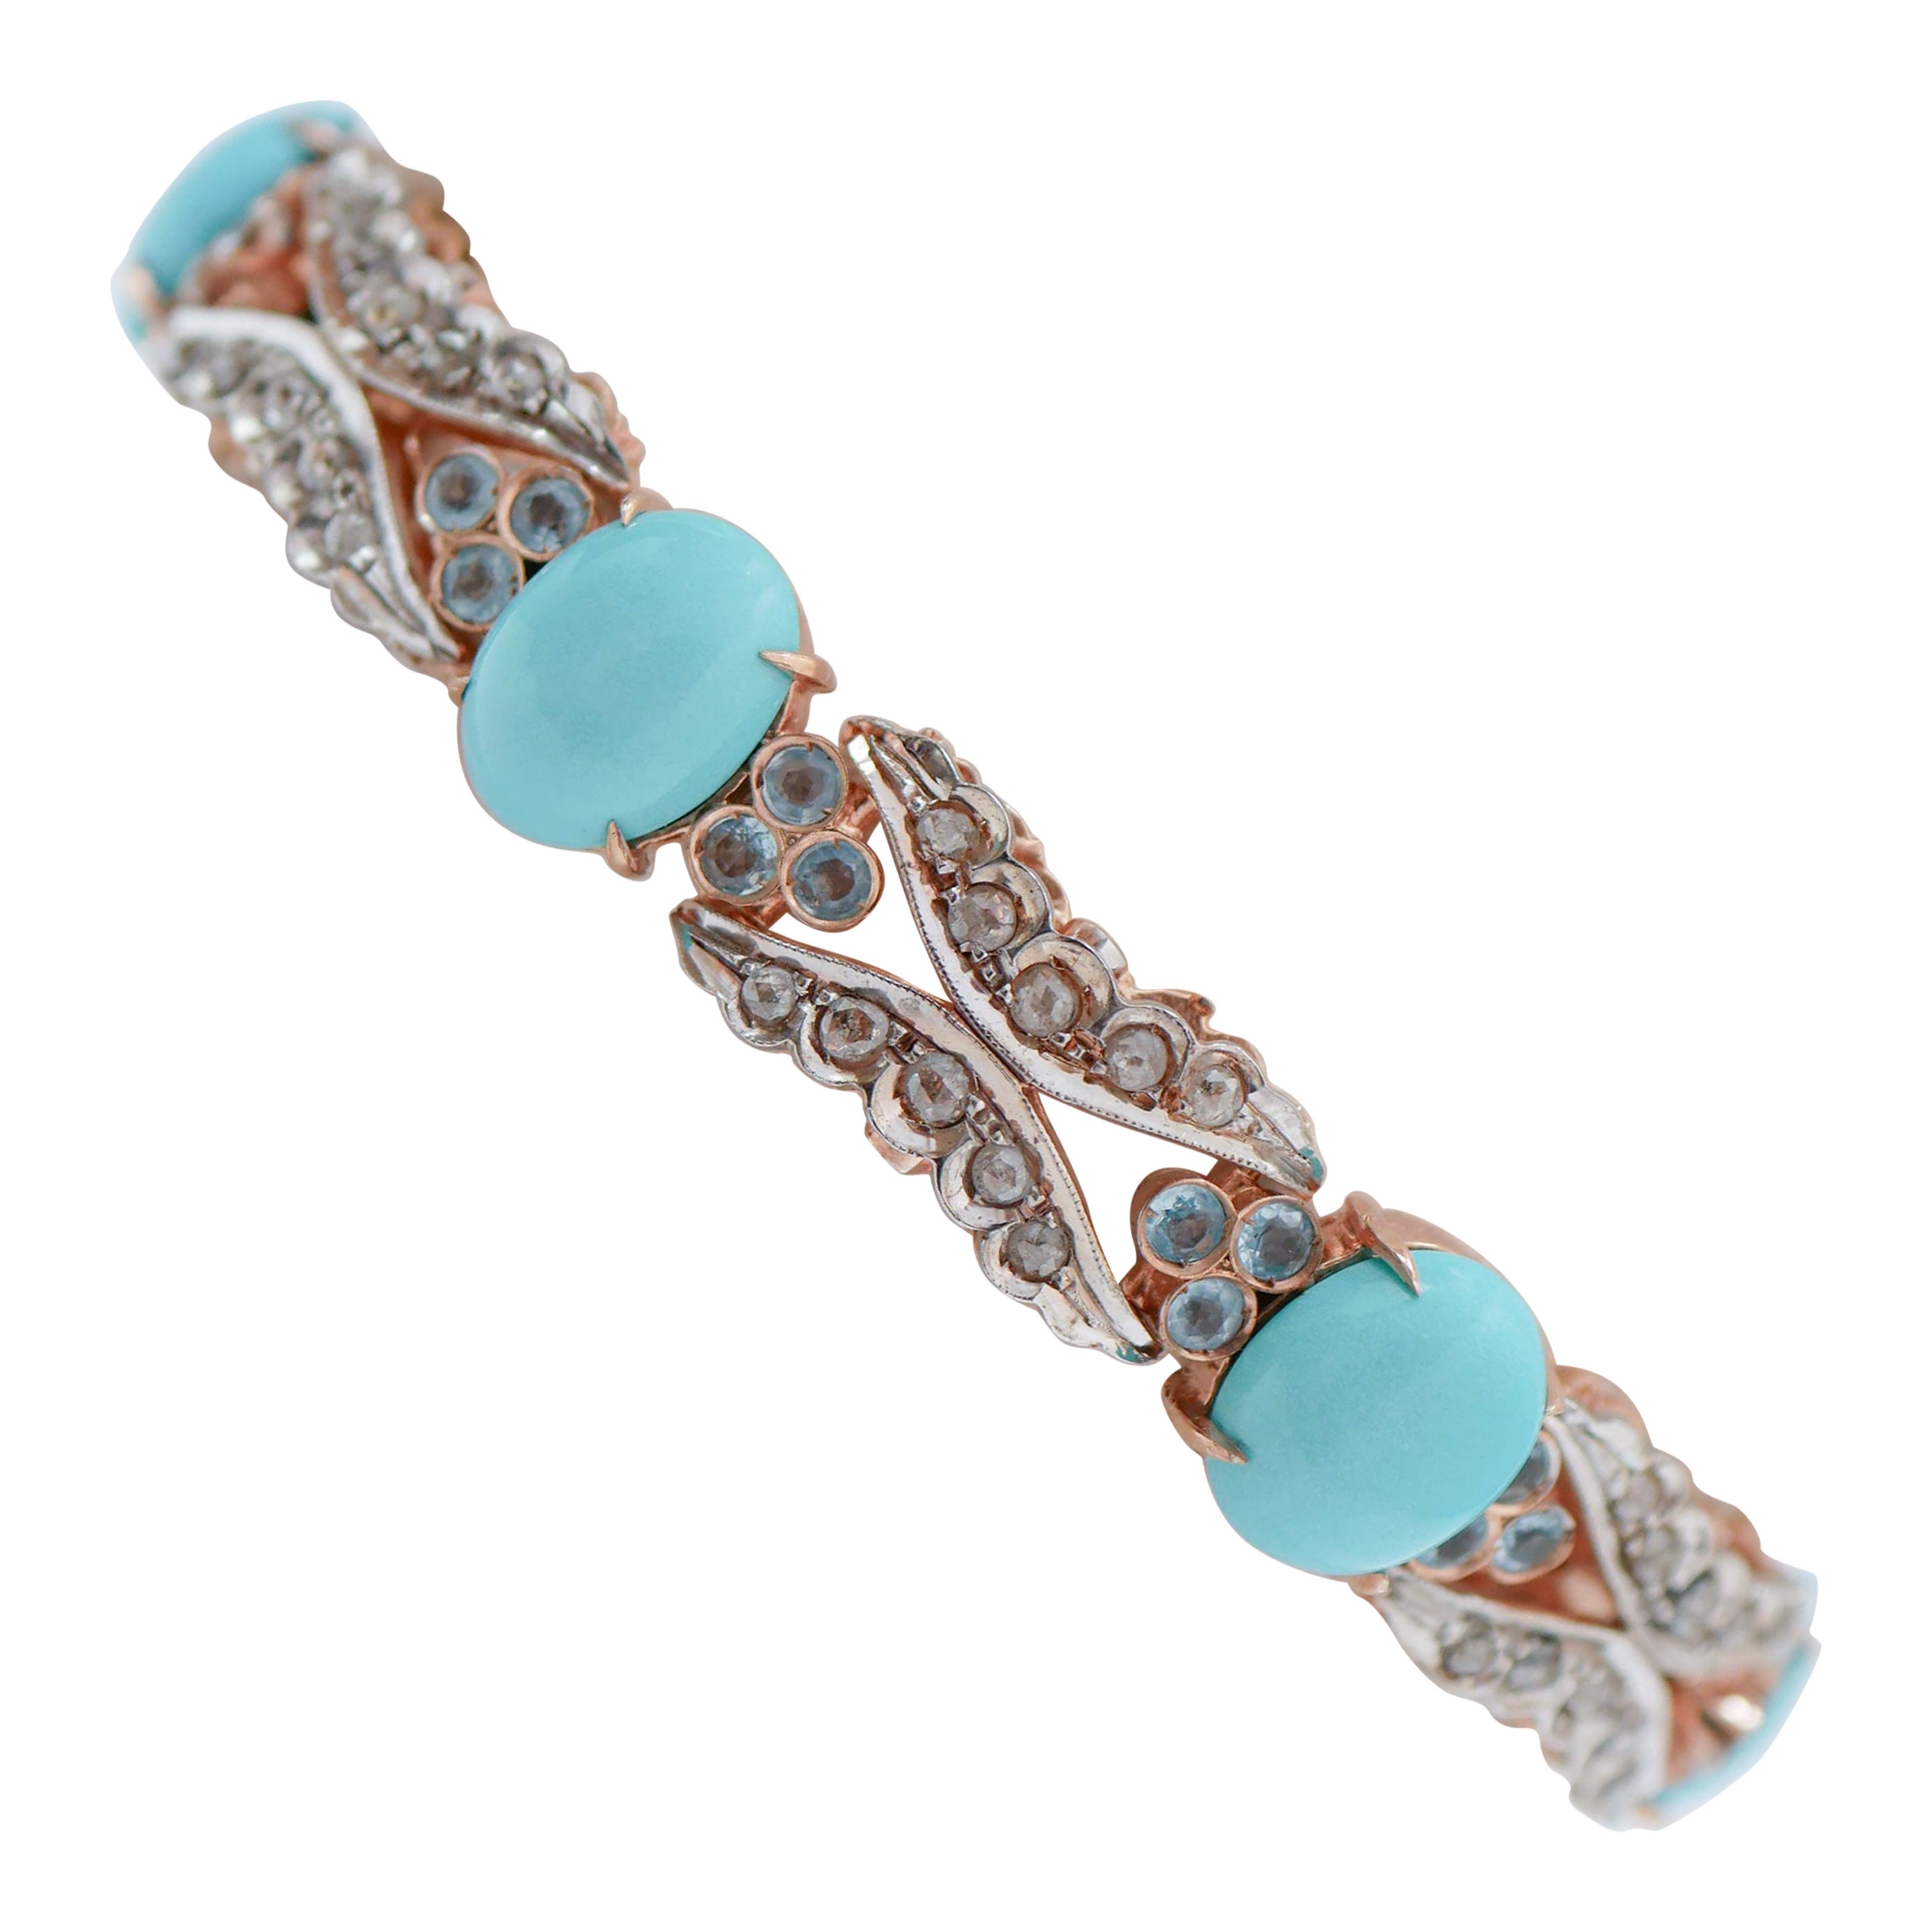 Turquoise, Aquamarine, Diamonds, Rose Gold and Silver Bracelet. For Sale